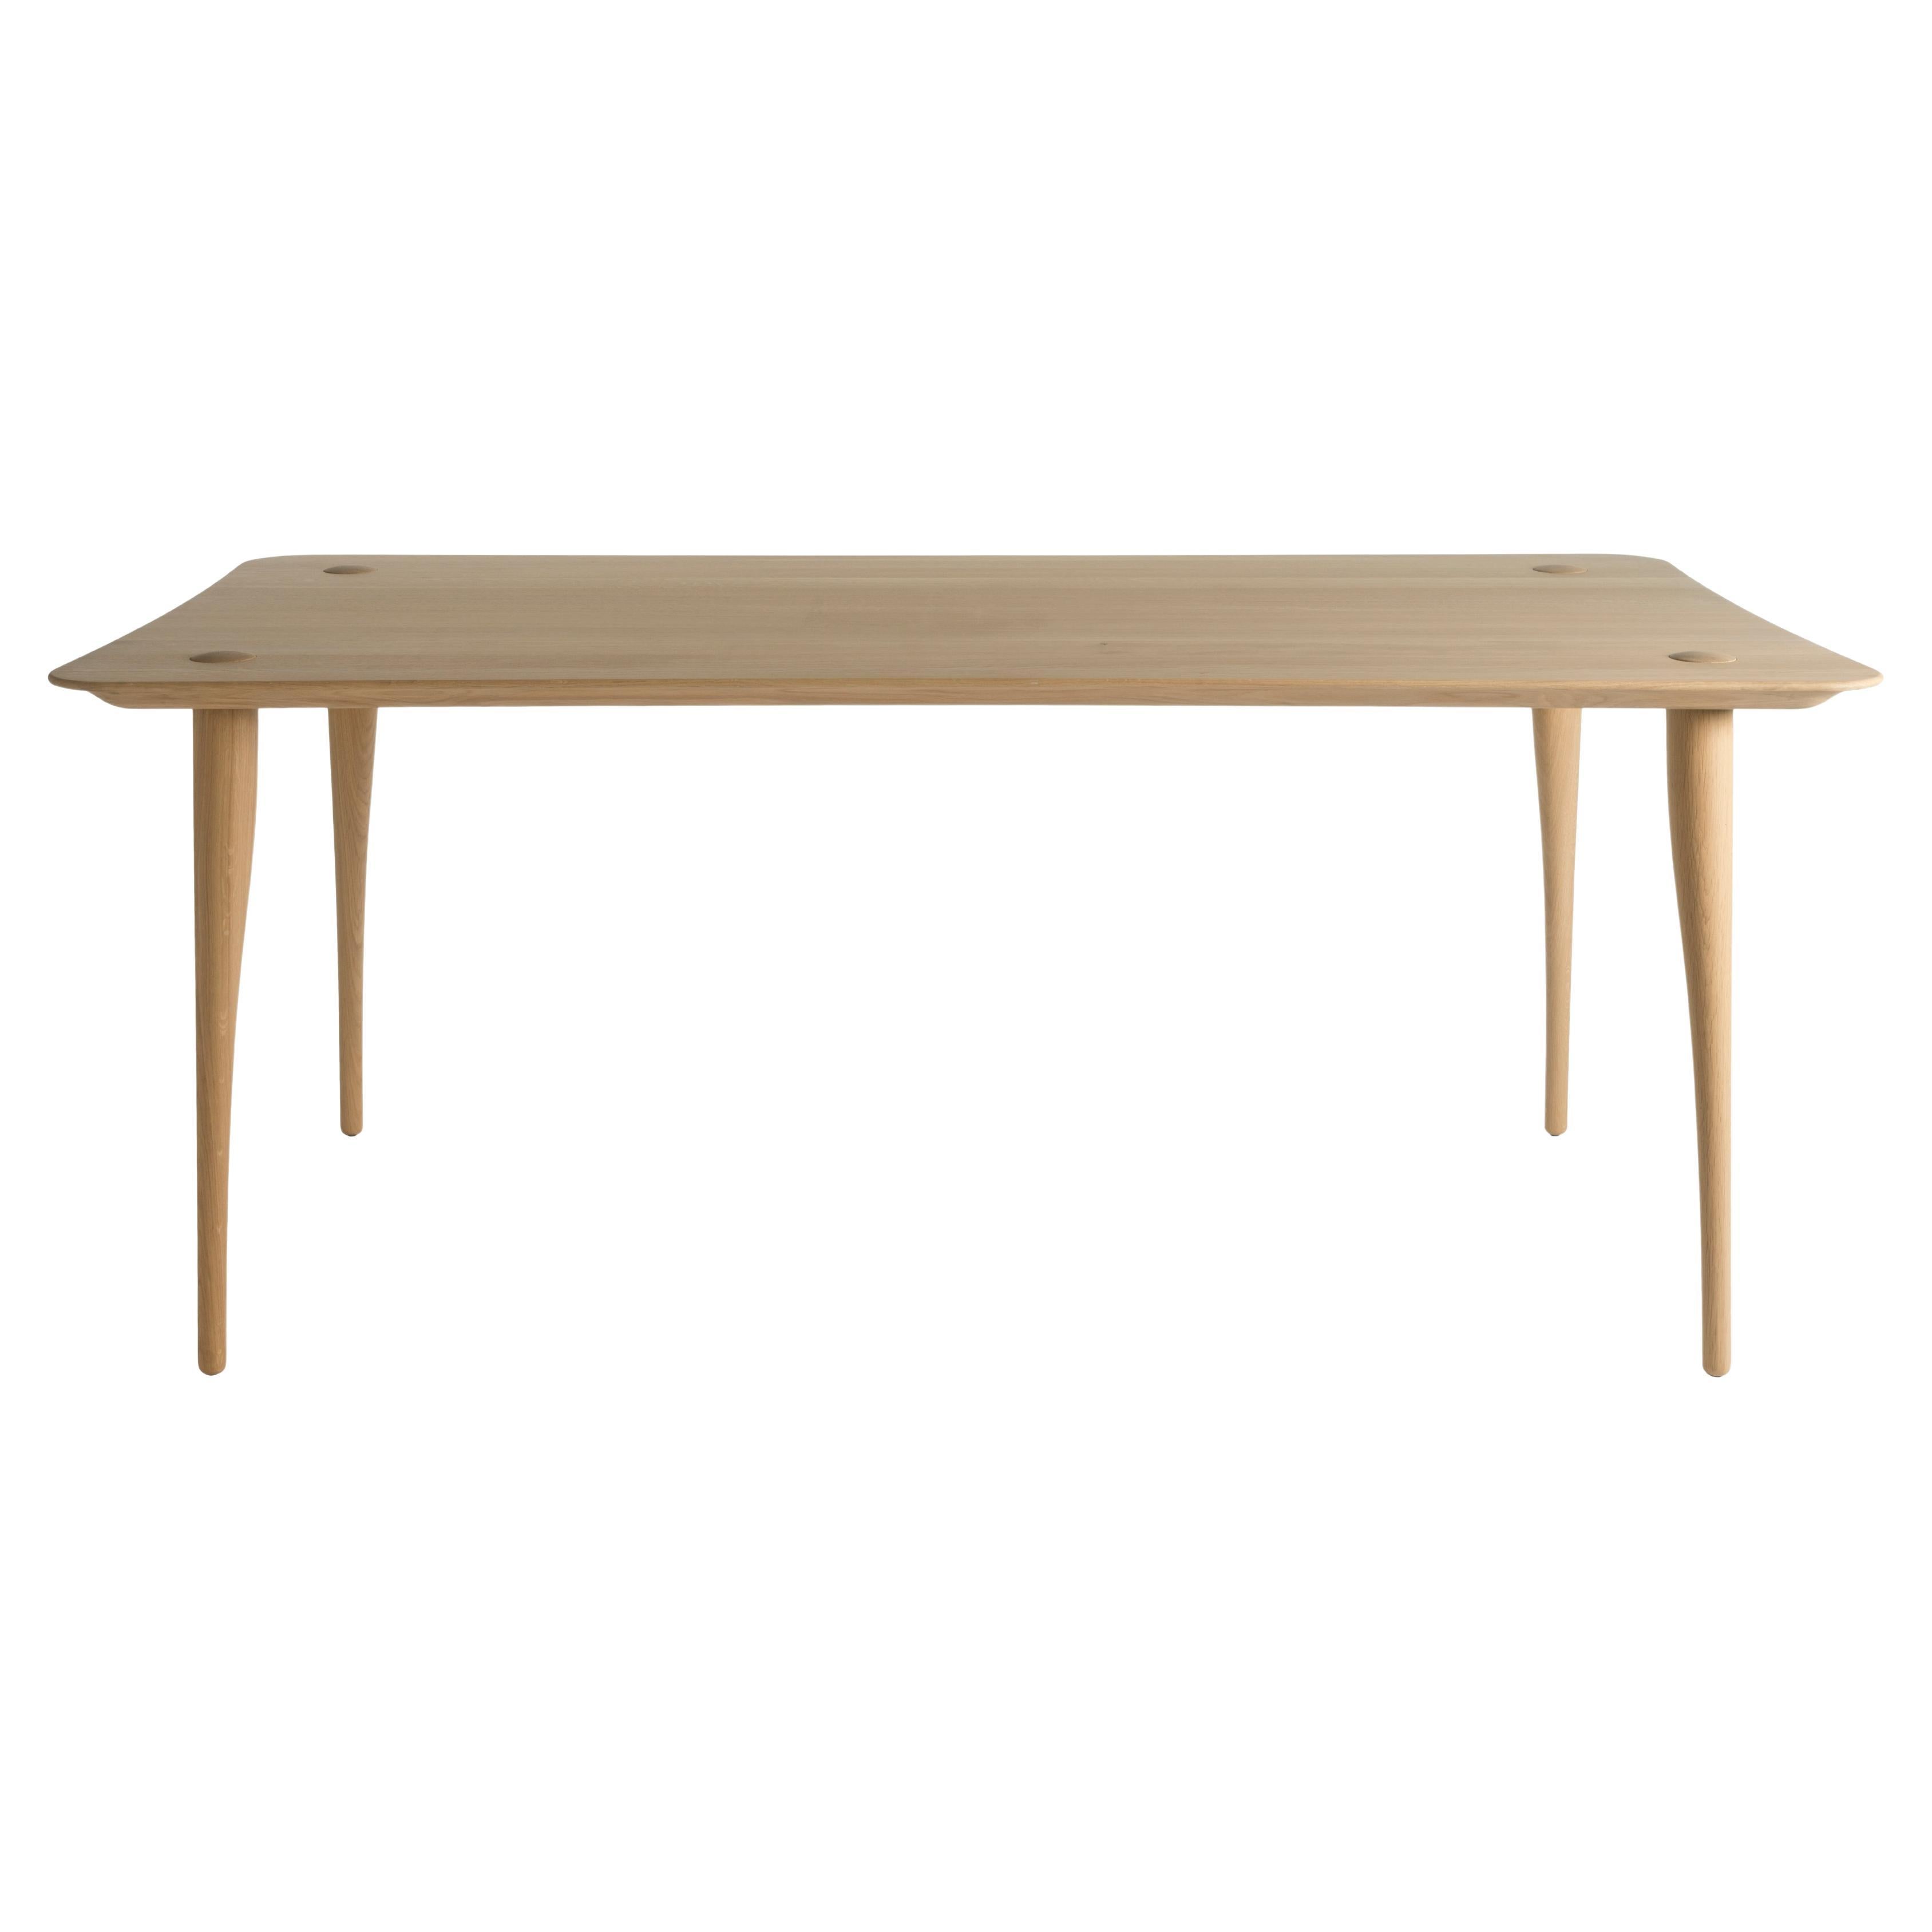 Revised Lewes - solid oak dining table - rectangle 240x95cm For Sale